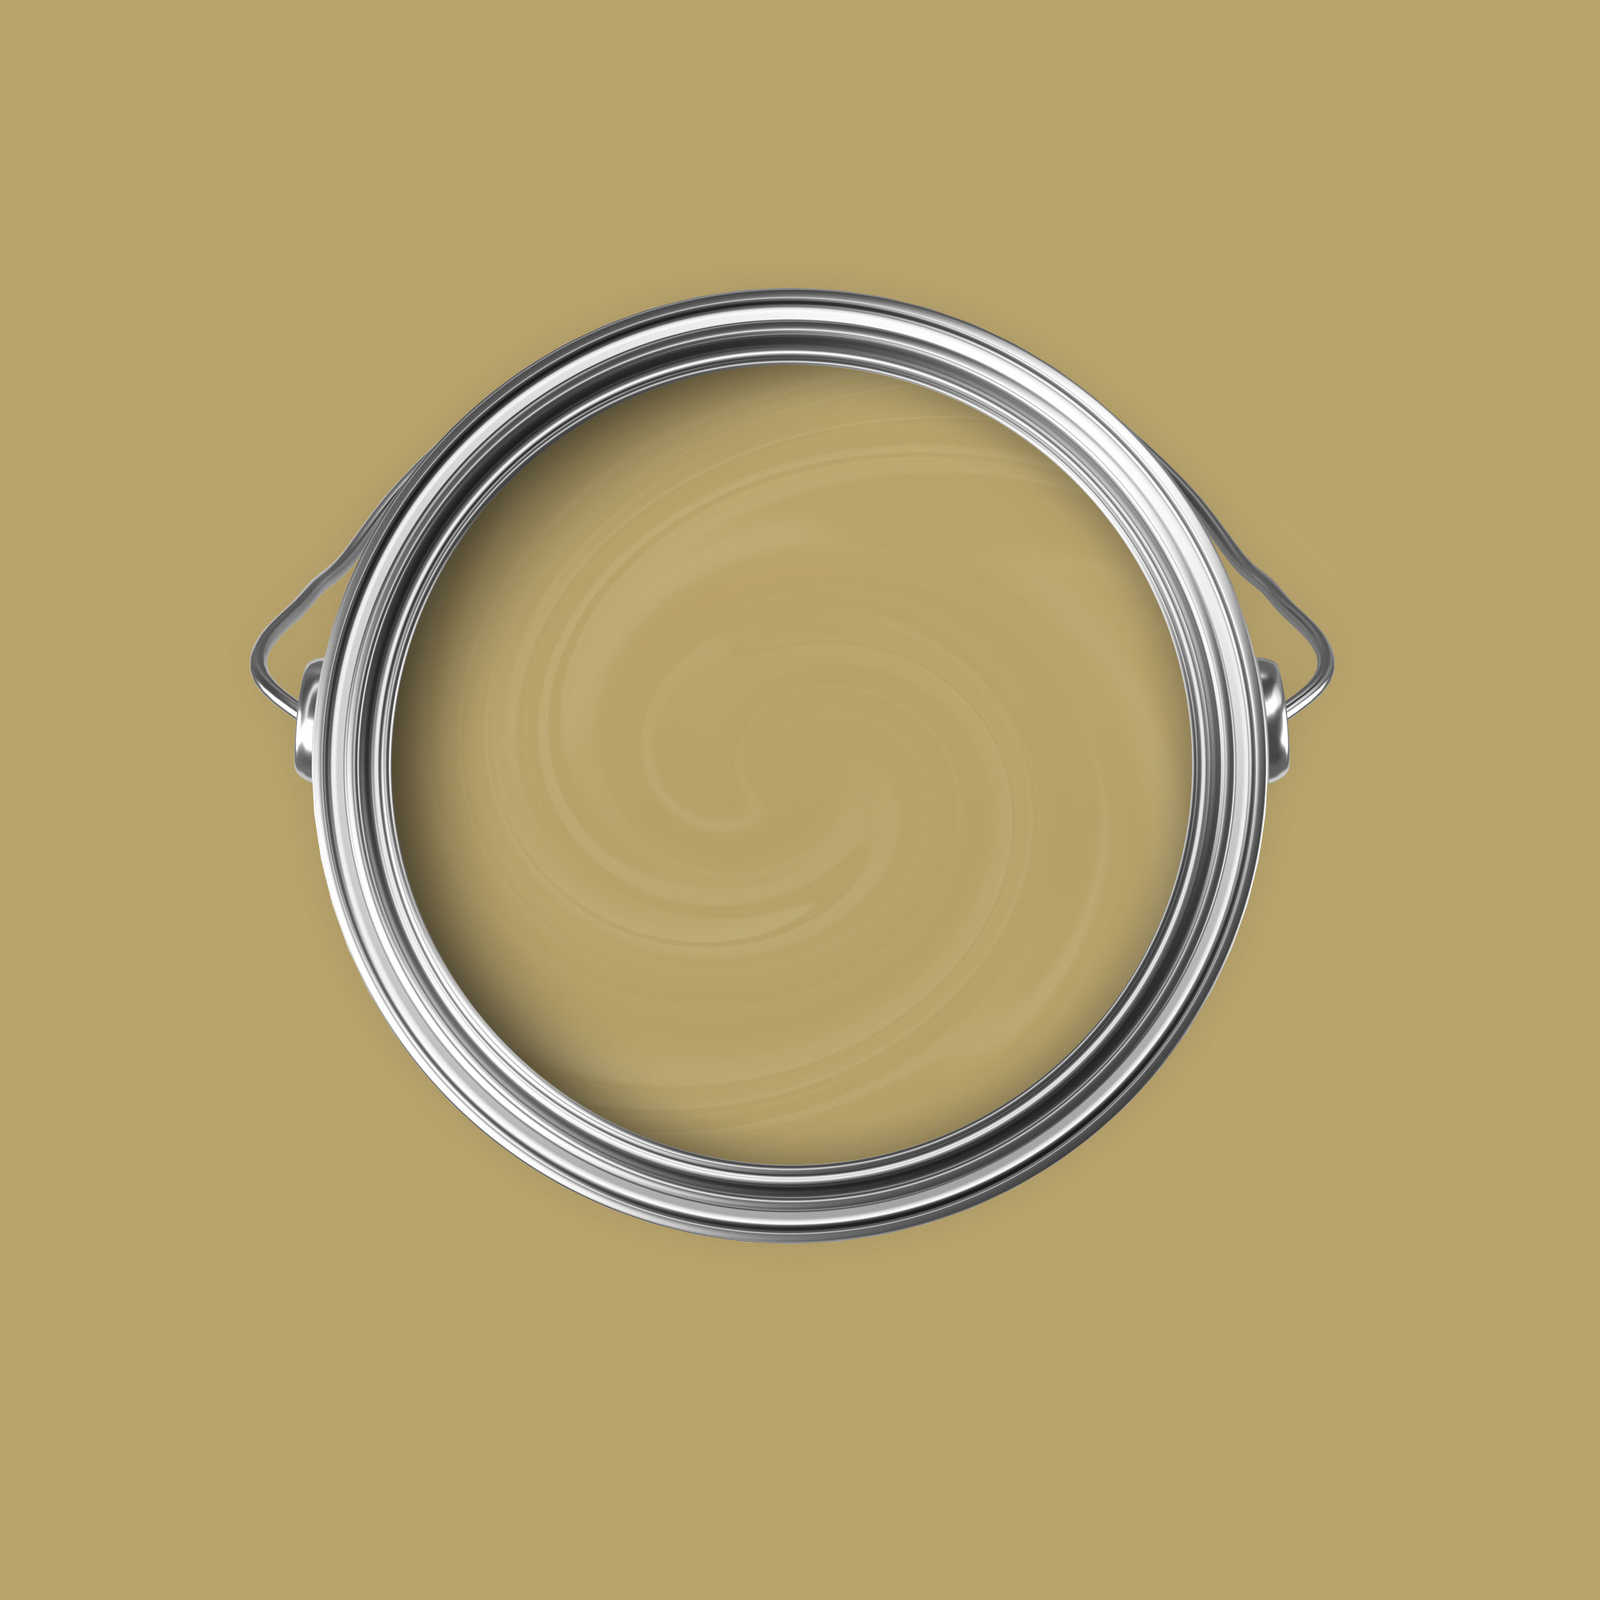             Premium Wall Paint Warm Khaki »Lucky Lime« NW605 – 5 litre
        